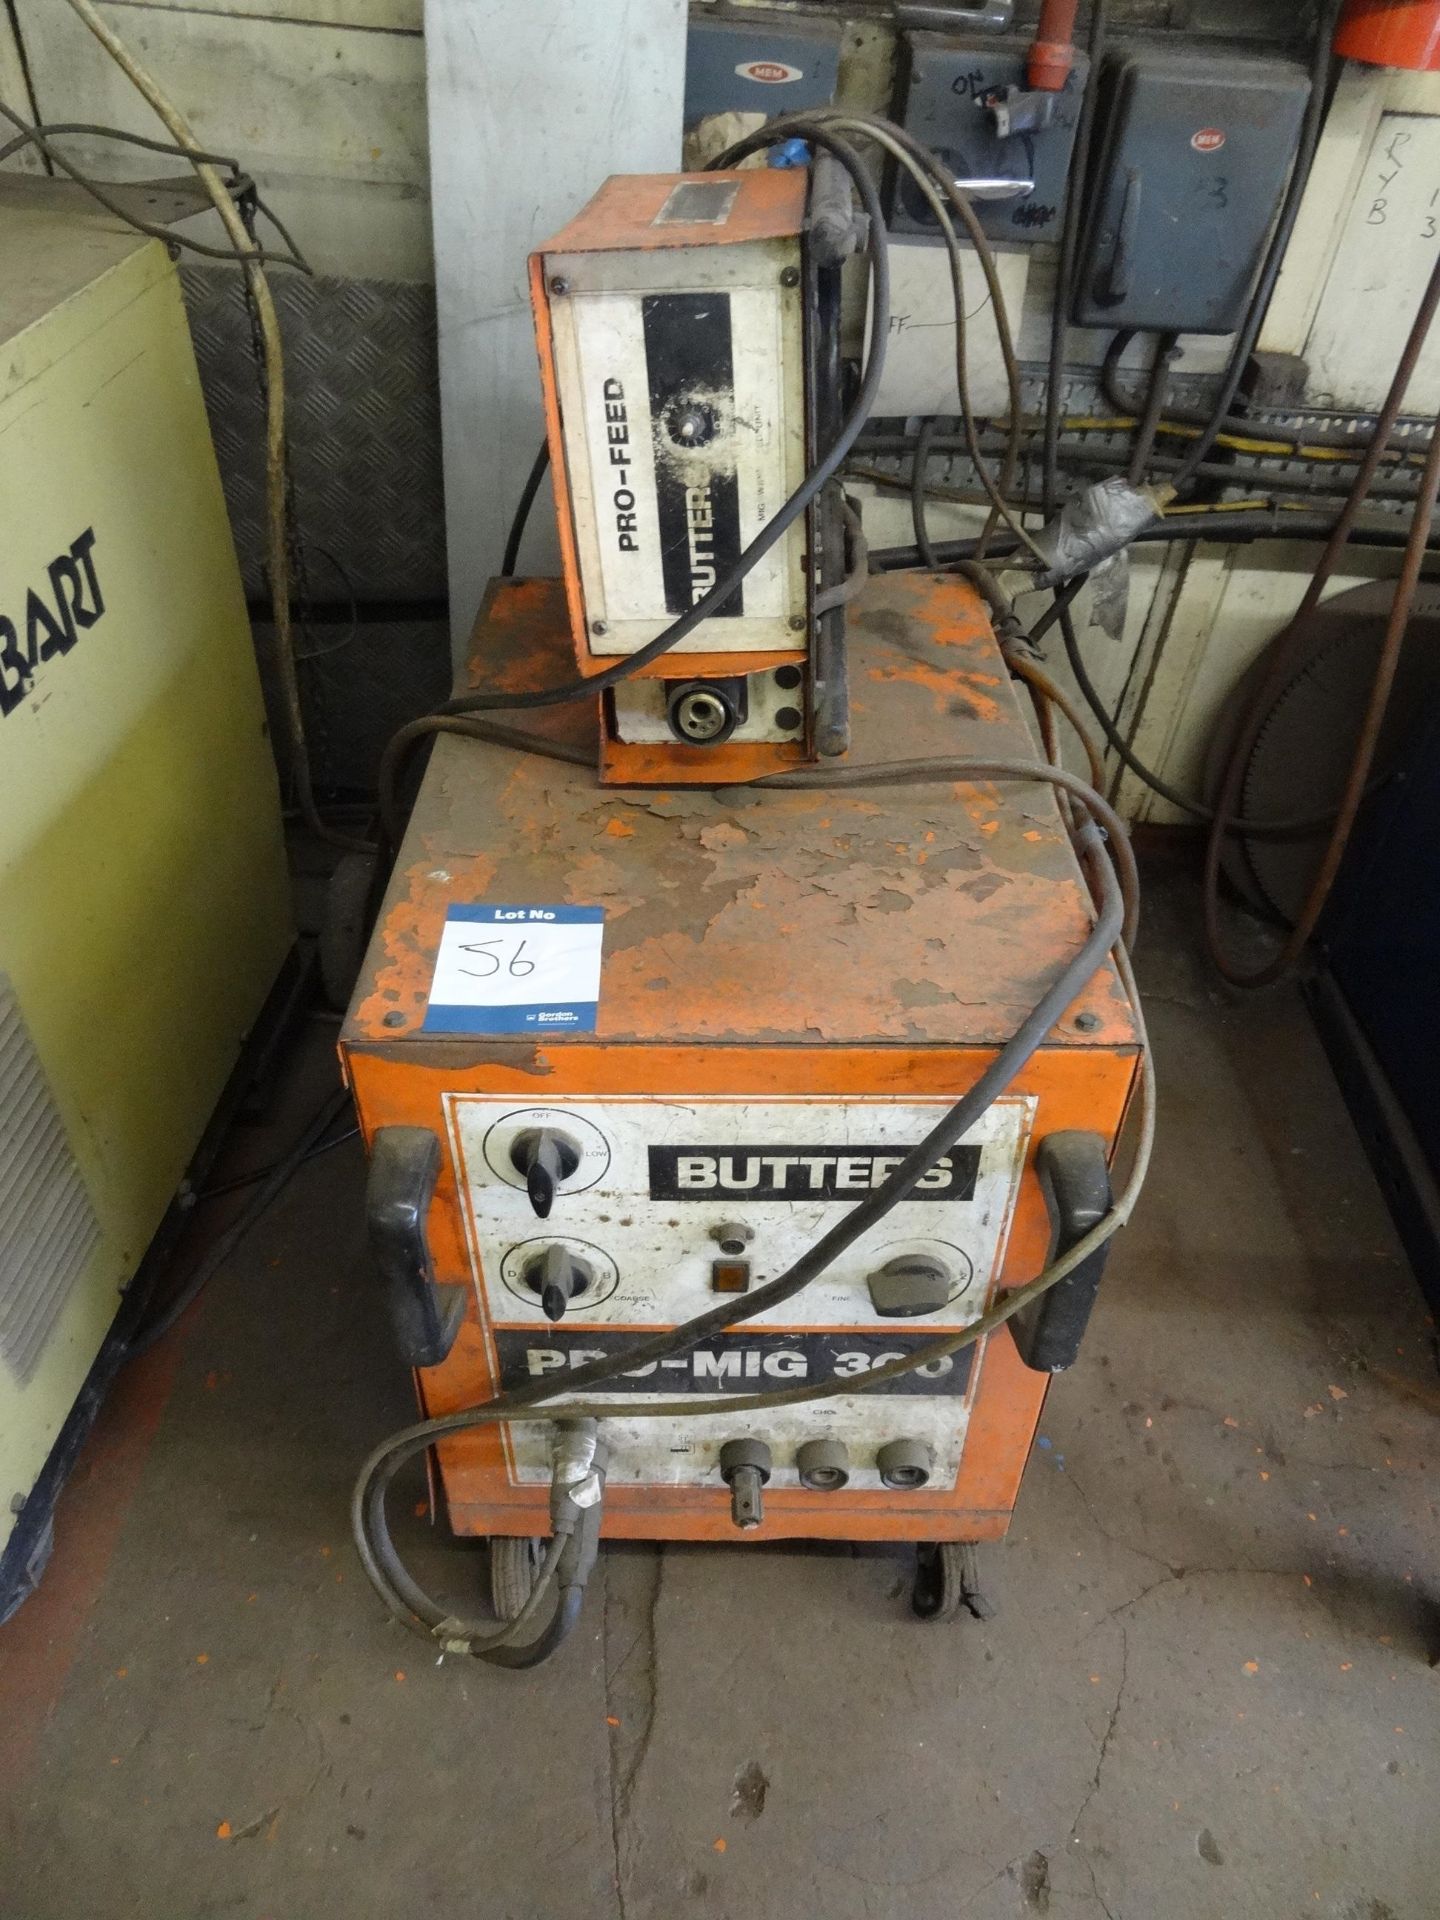 Butters Pro Mig 300 mig welding set with wire feed unit (Lift out charge £10 plus VAT)